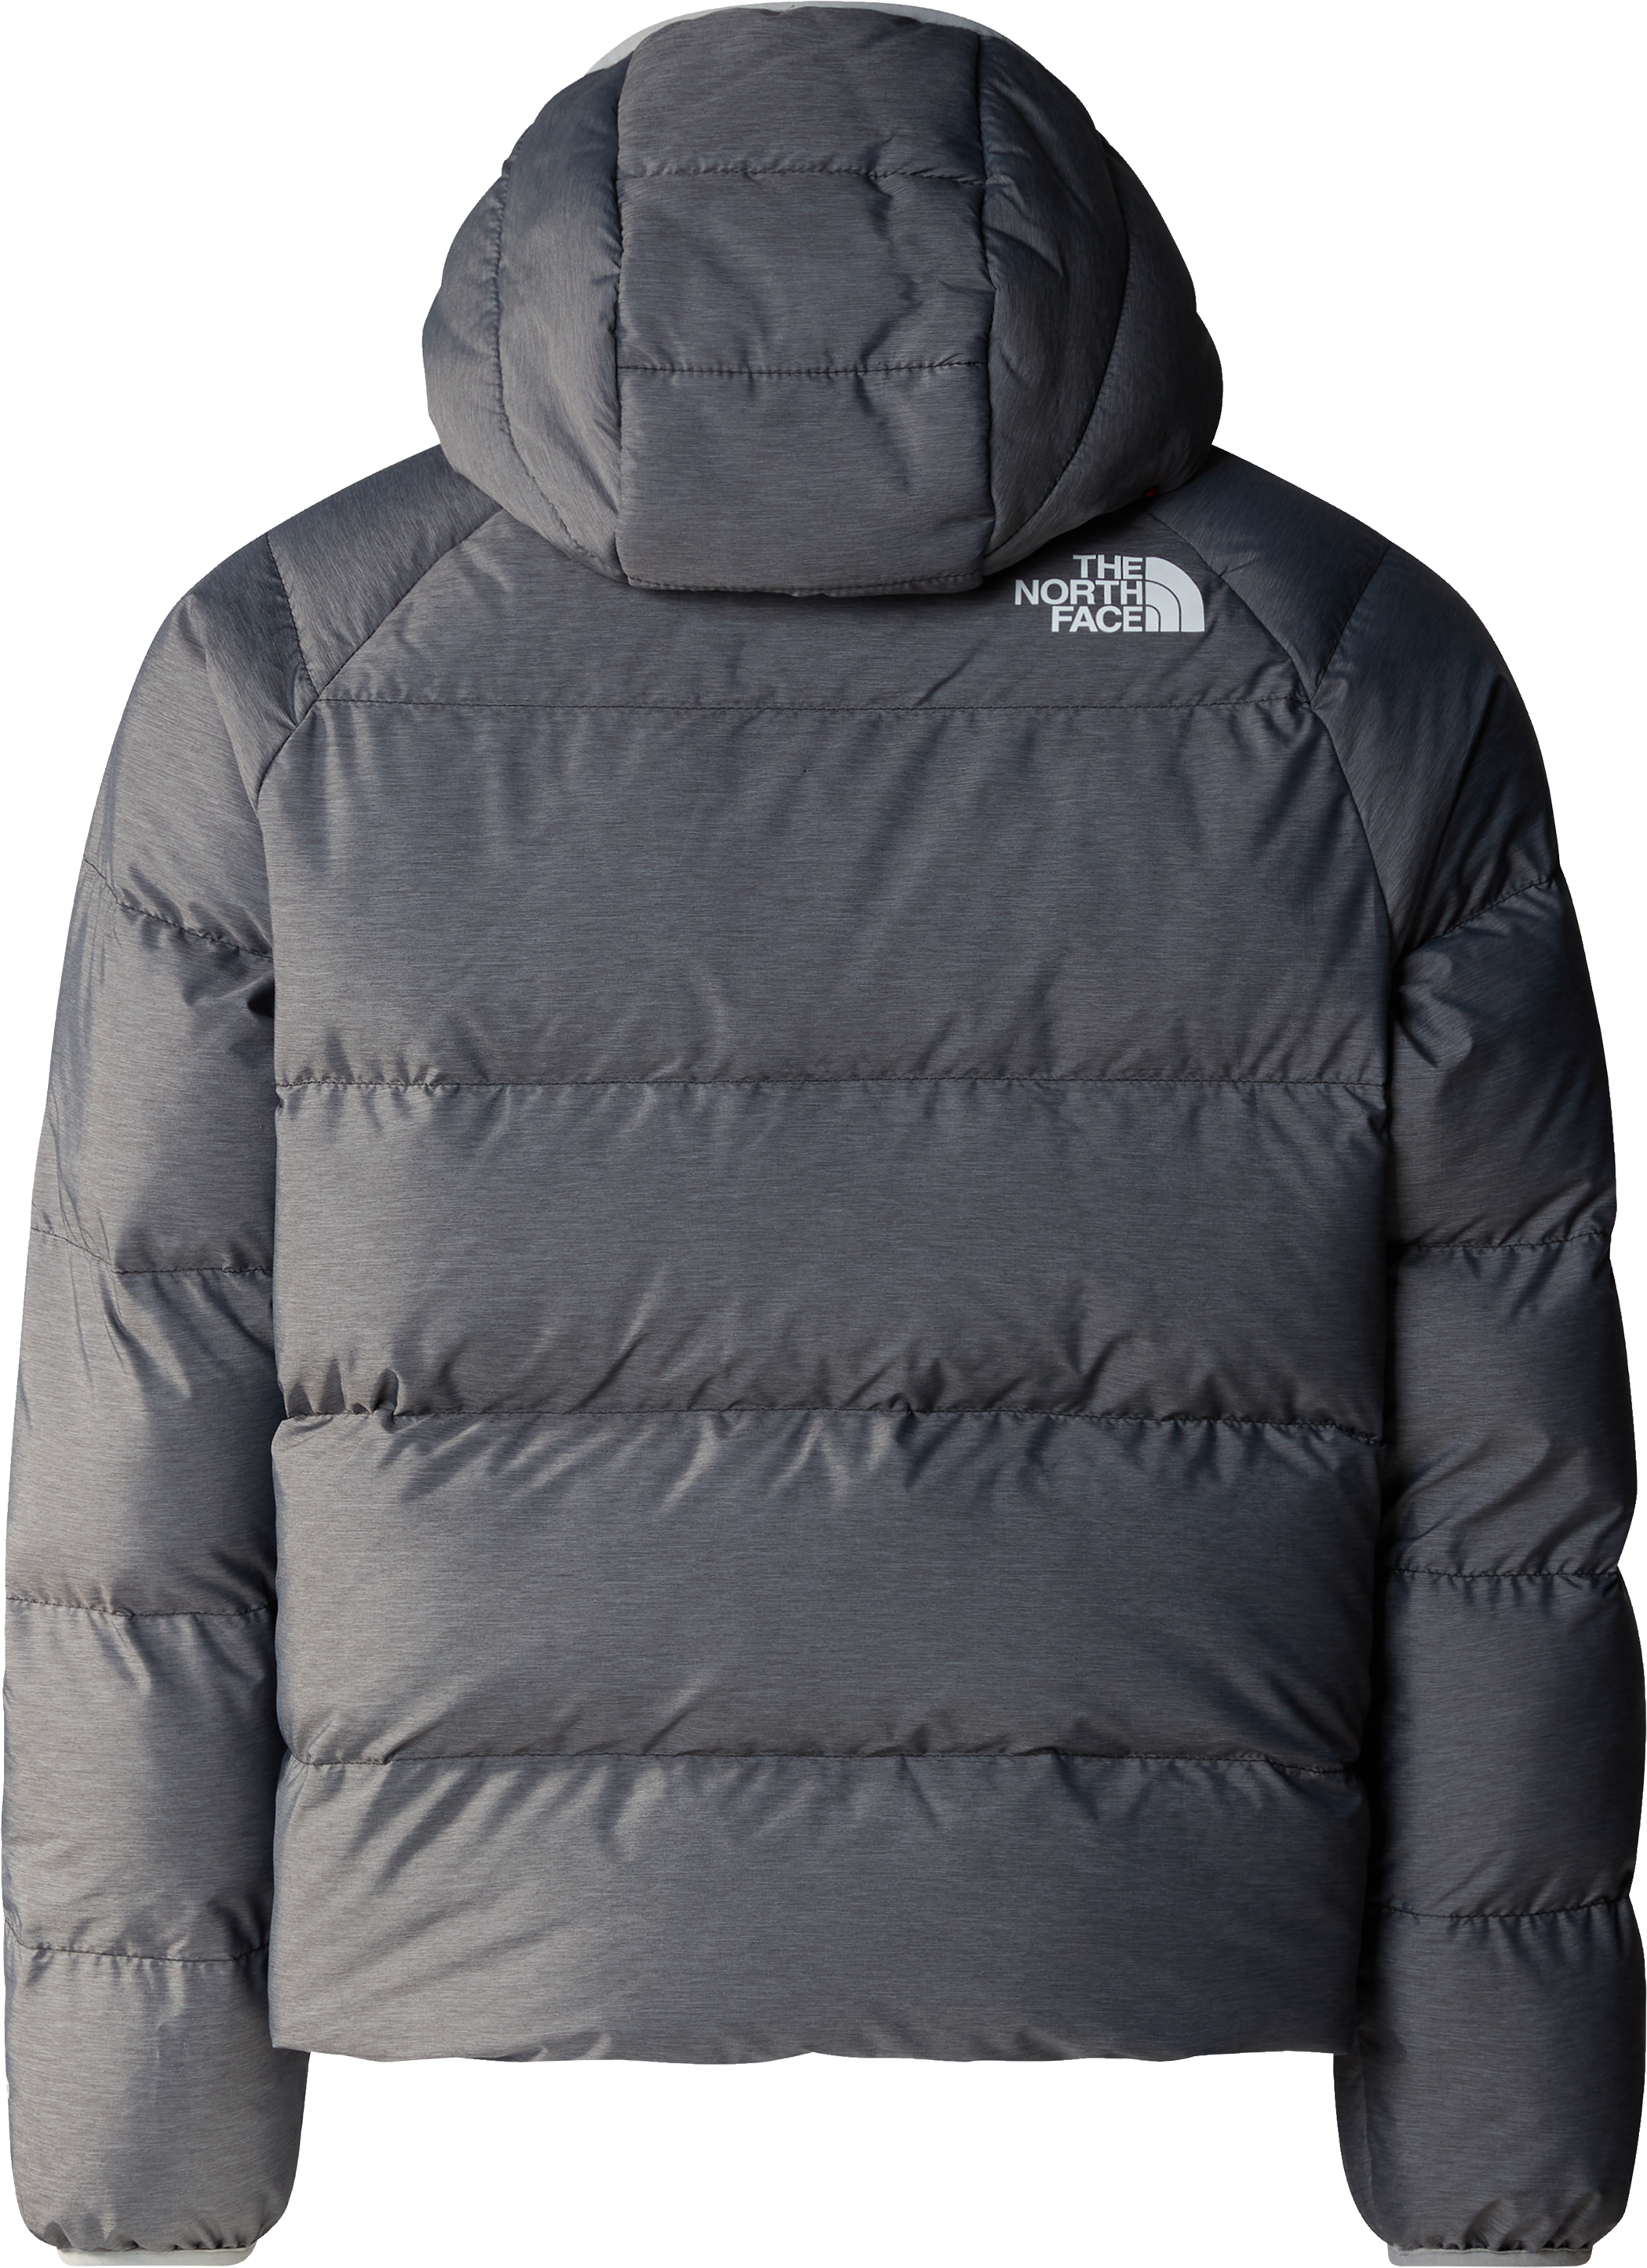 The North Face Boys' Hyalite Winter Jacket, Kids', Puffer, Insulated, Down,  Hooded